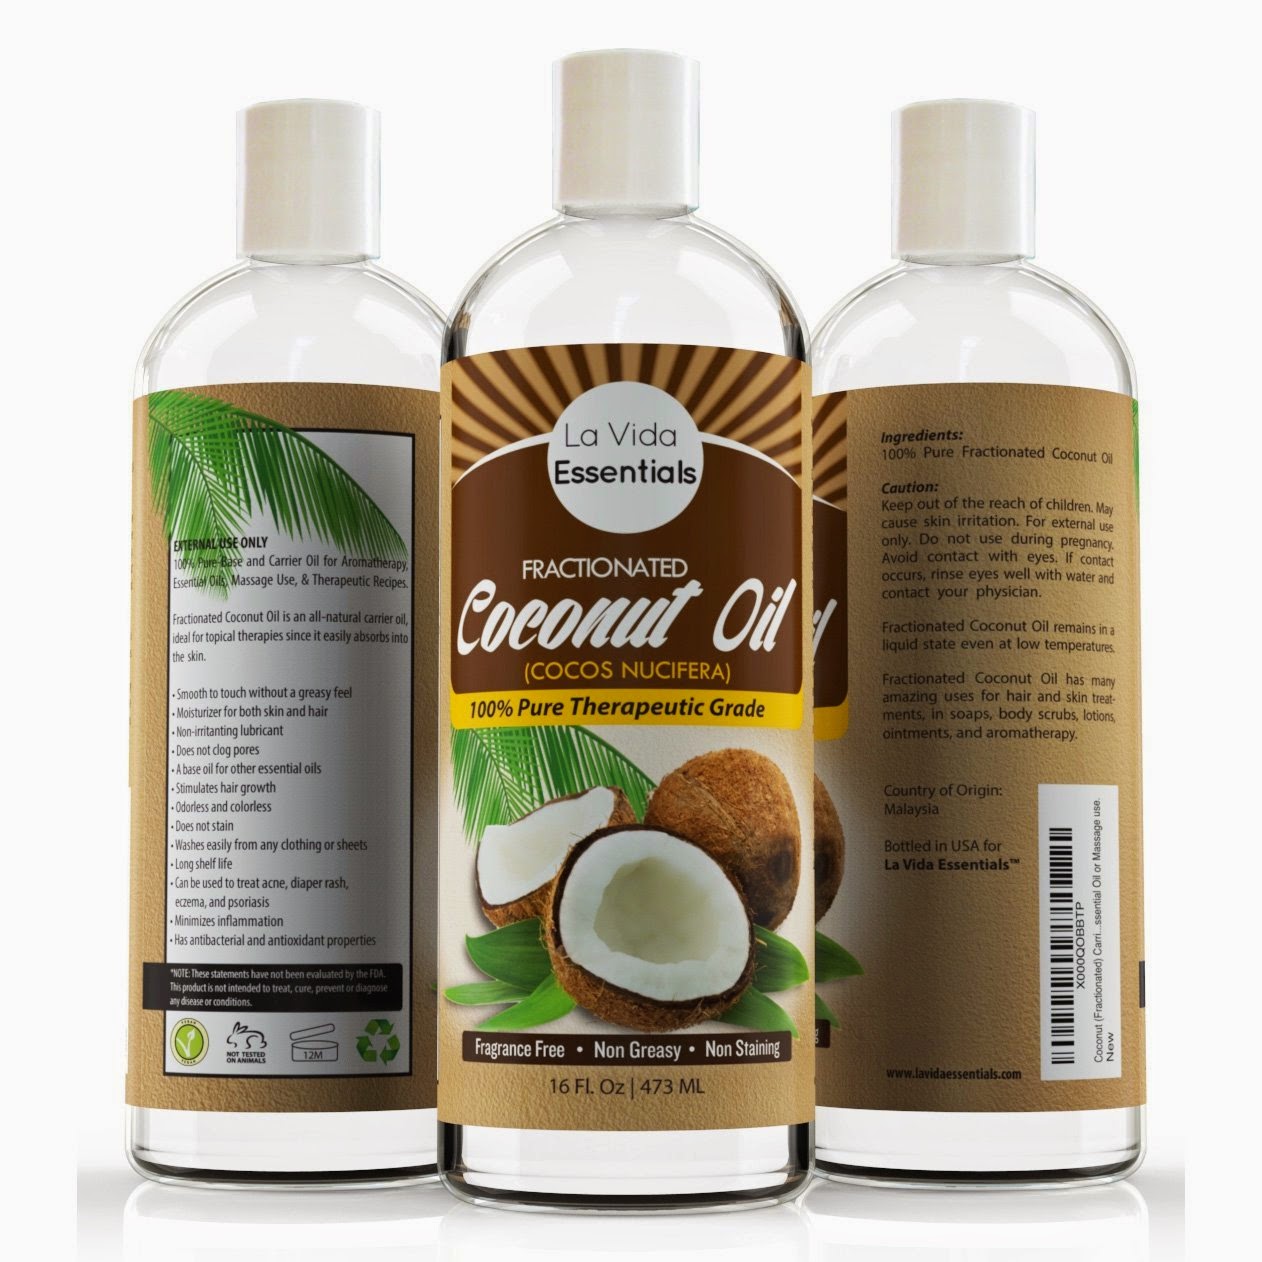 Product Reviews by Pam: La Vida Essentials Fractionated Coconut Oil